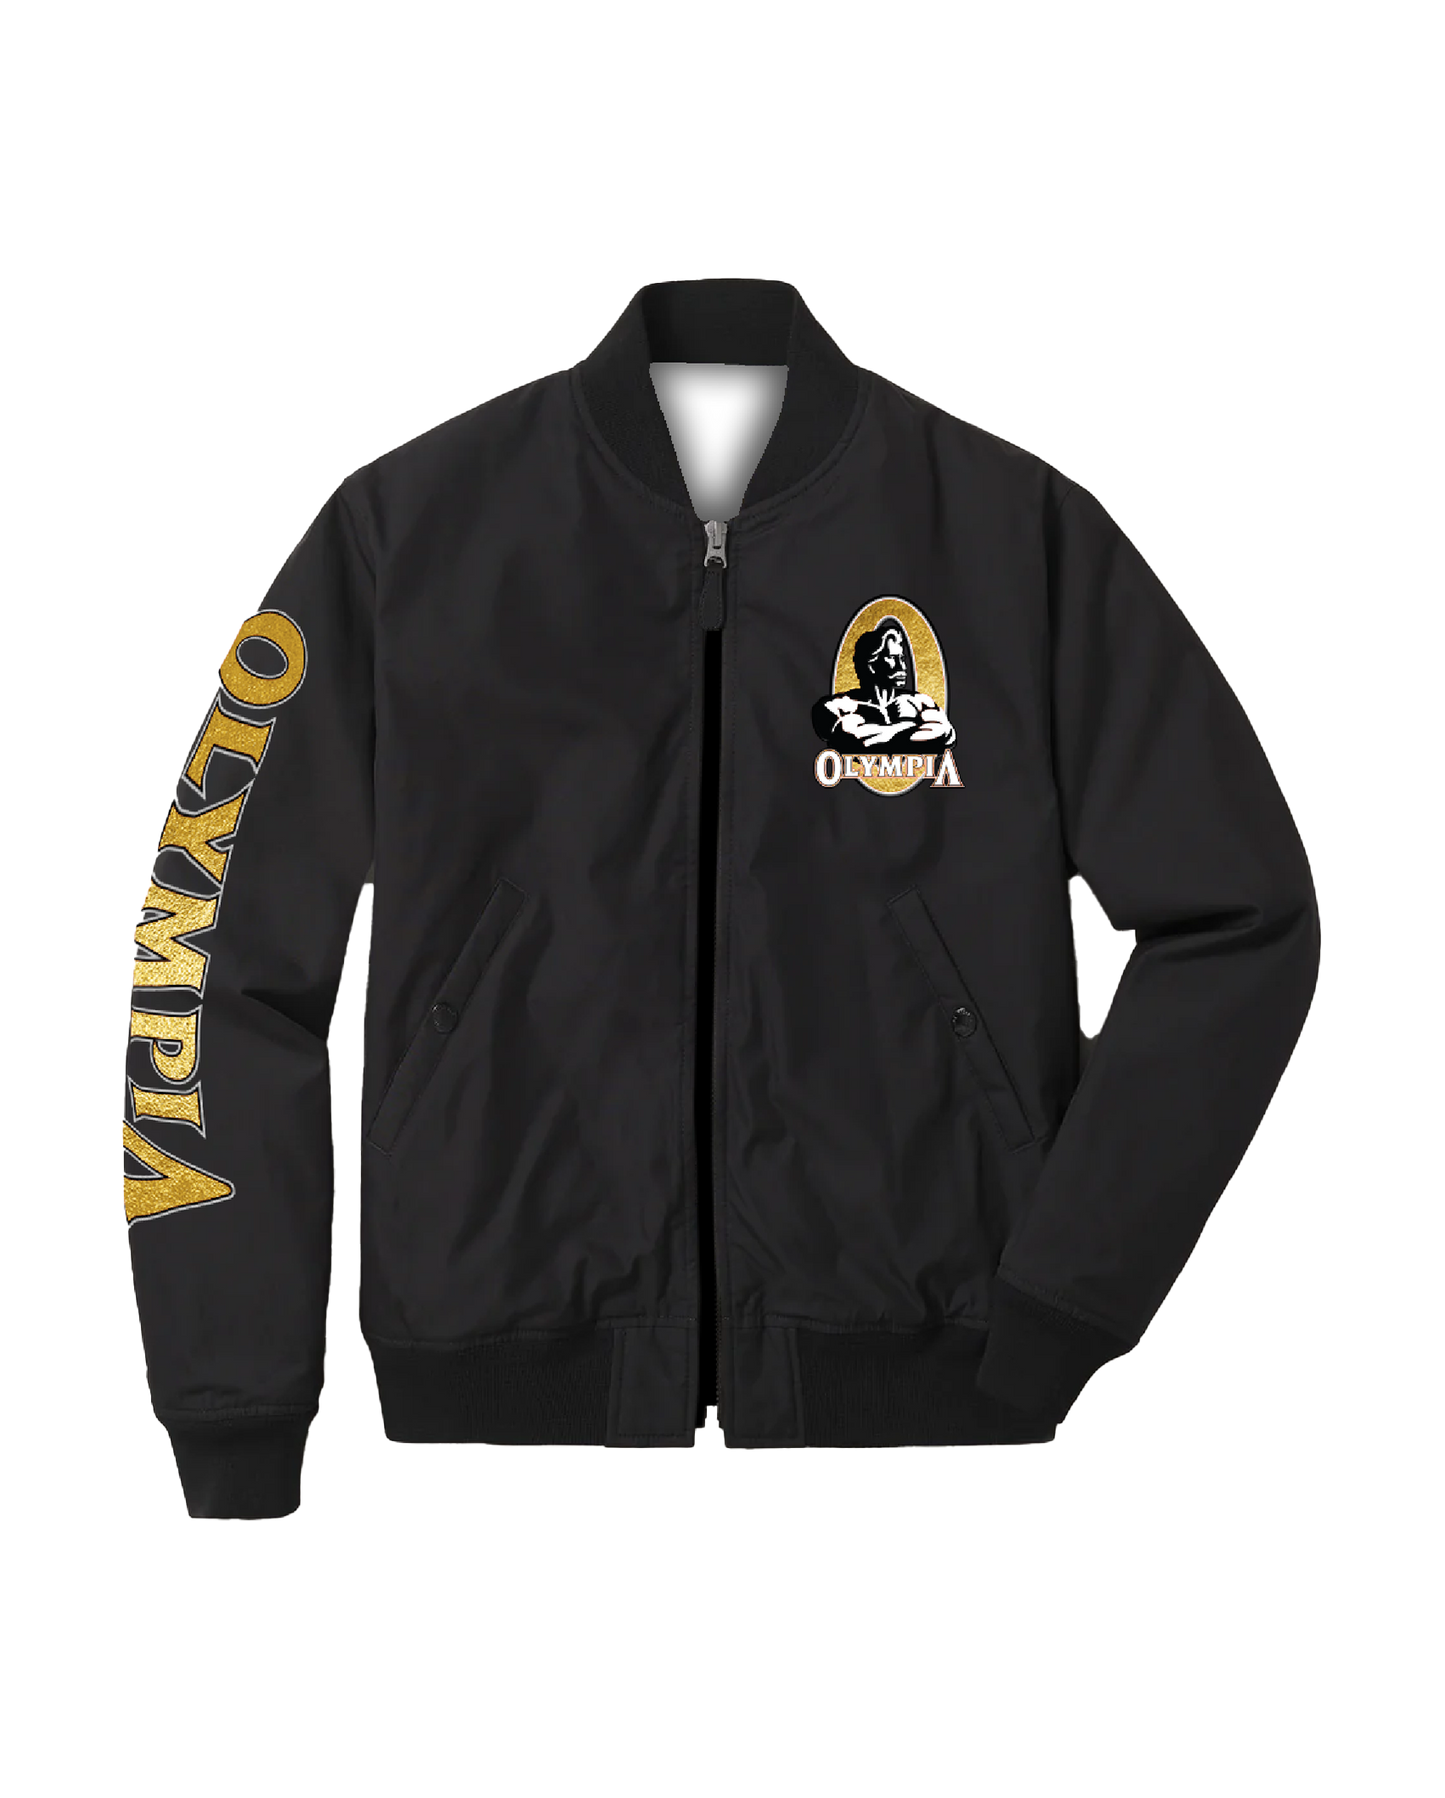 OIympia Gold Edition Reversible Jacket